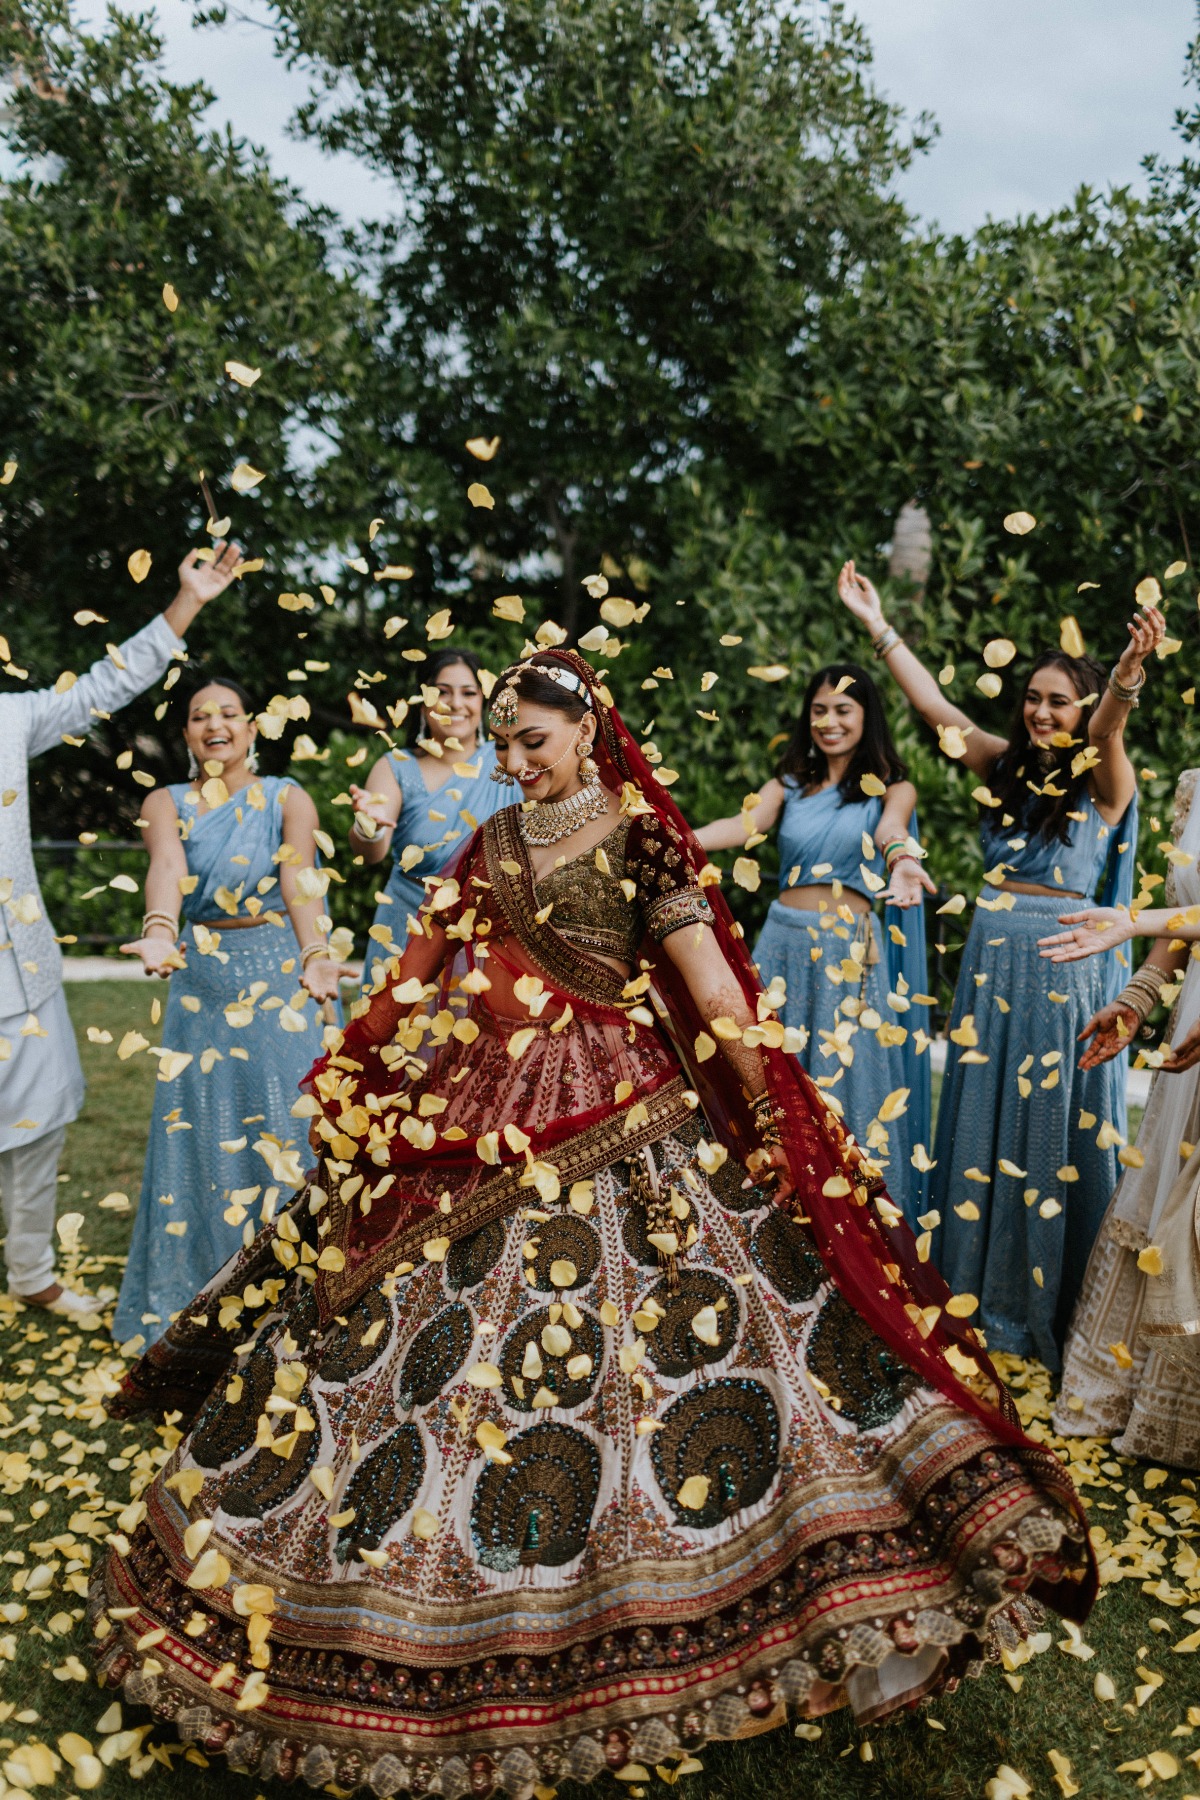 Indian bride in red and gold sari being showered with yellow petals